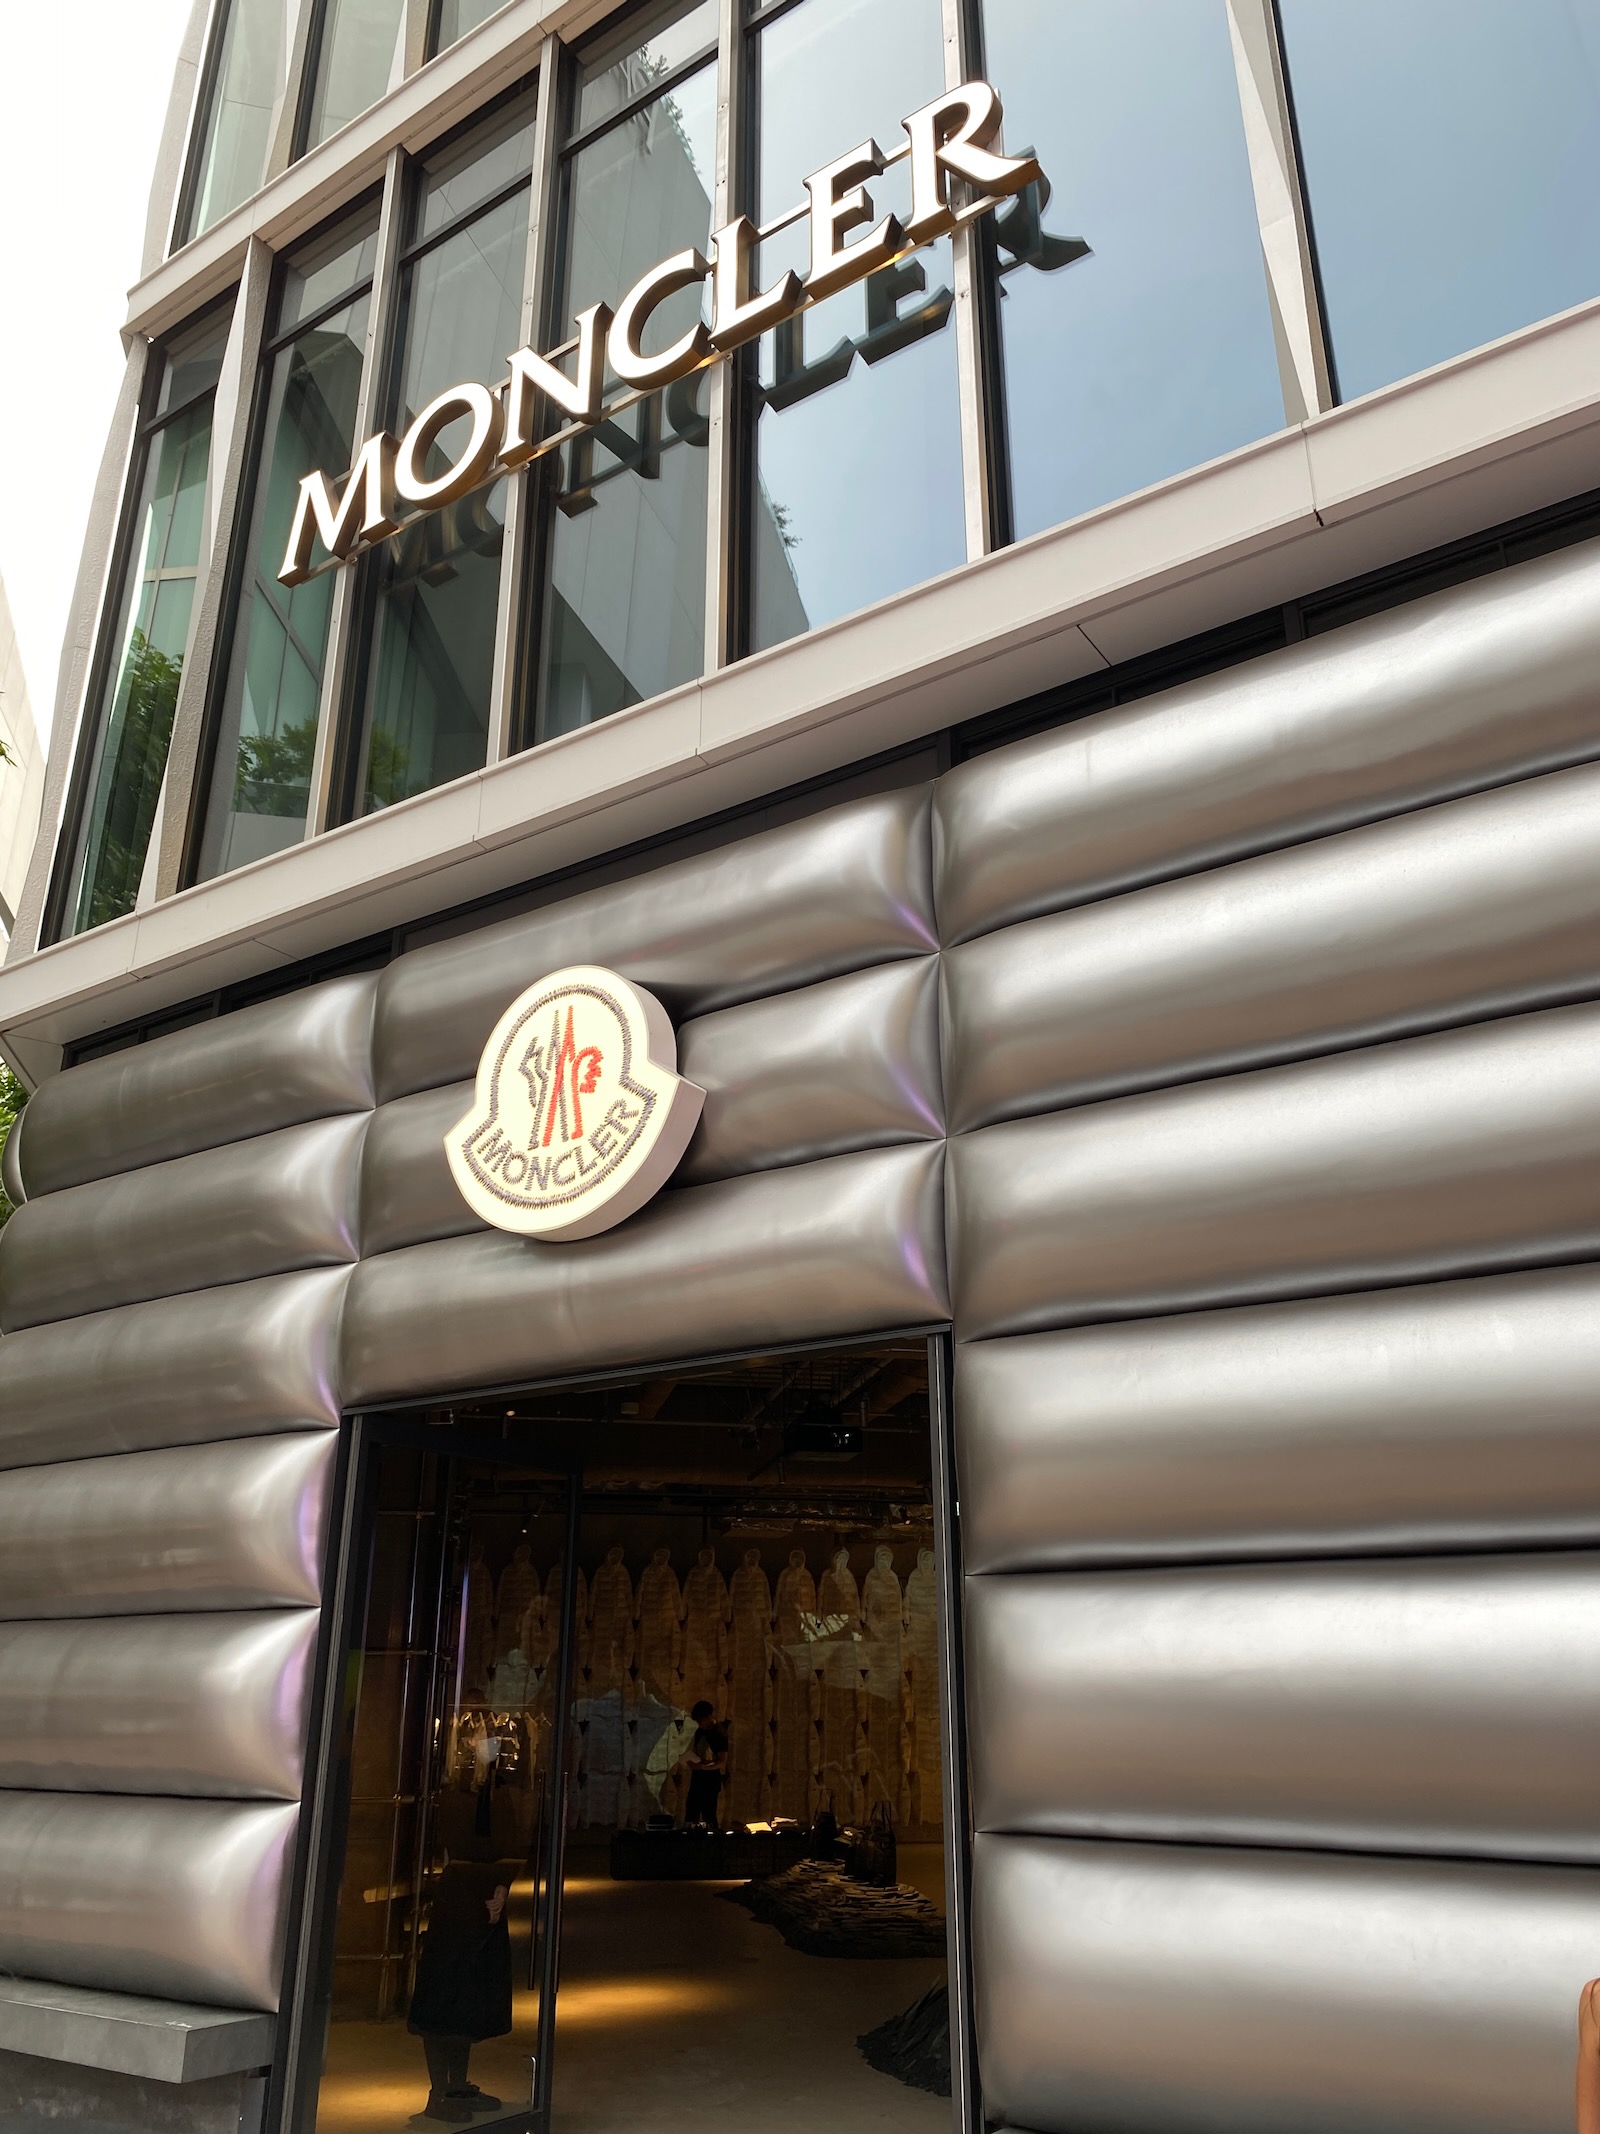 Exterior of a Moncler winter apparel store, with silver puffy sections mimicking a puffer jacket.